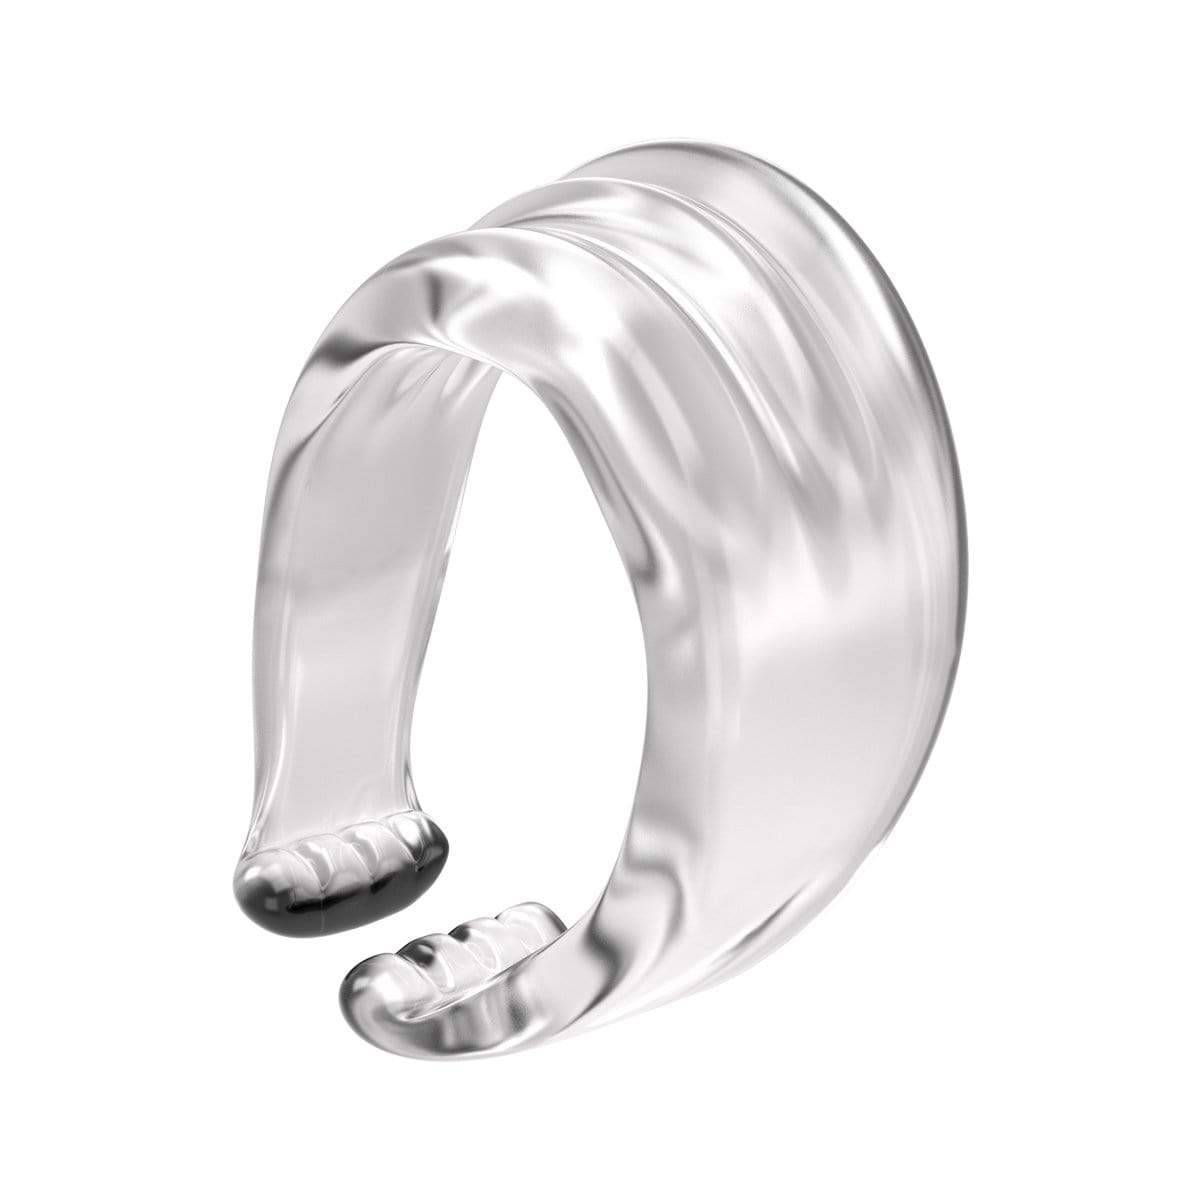 SSI Japan - My Peace Wide Standard Day Size M Correction Cock Ring (Clear) SSI1026 CherryAffairs